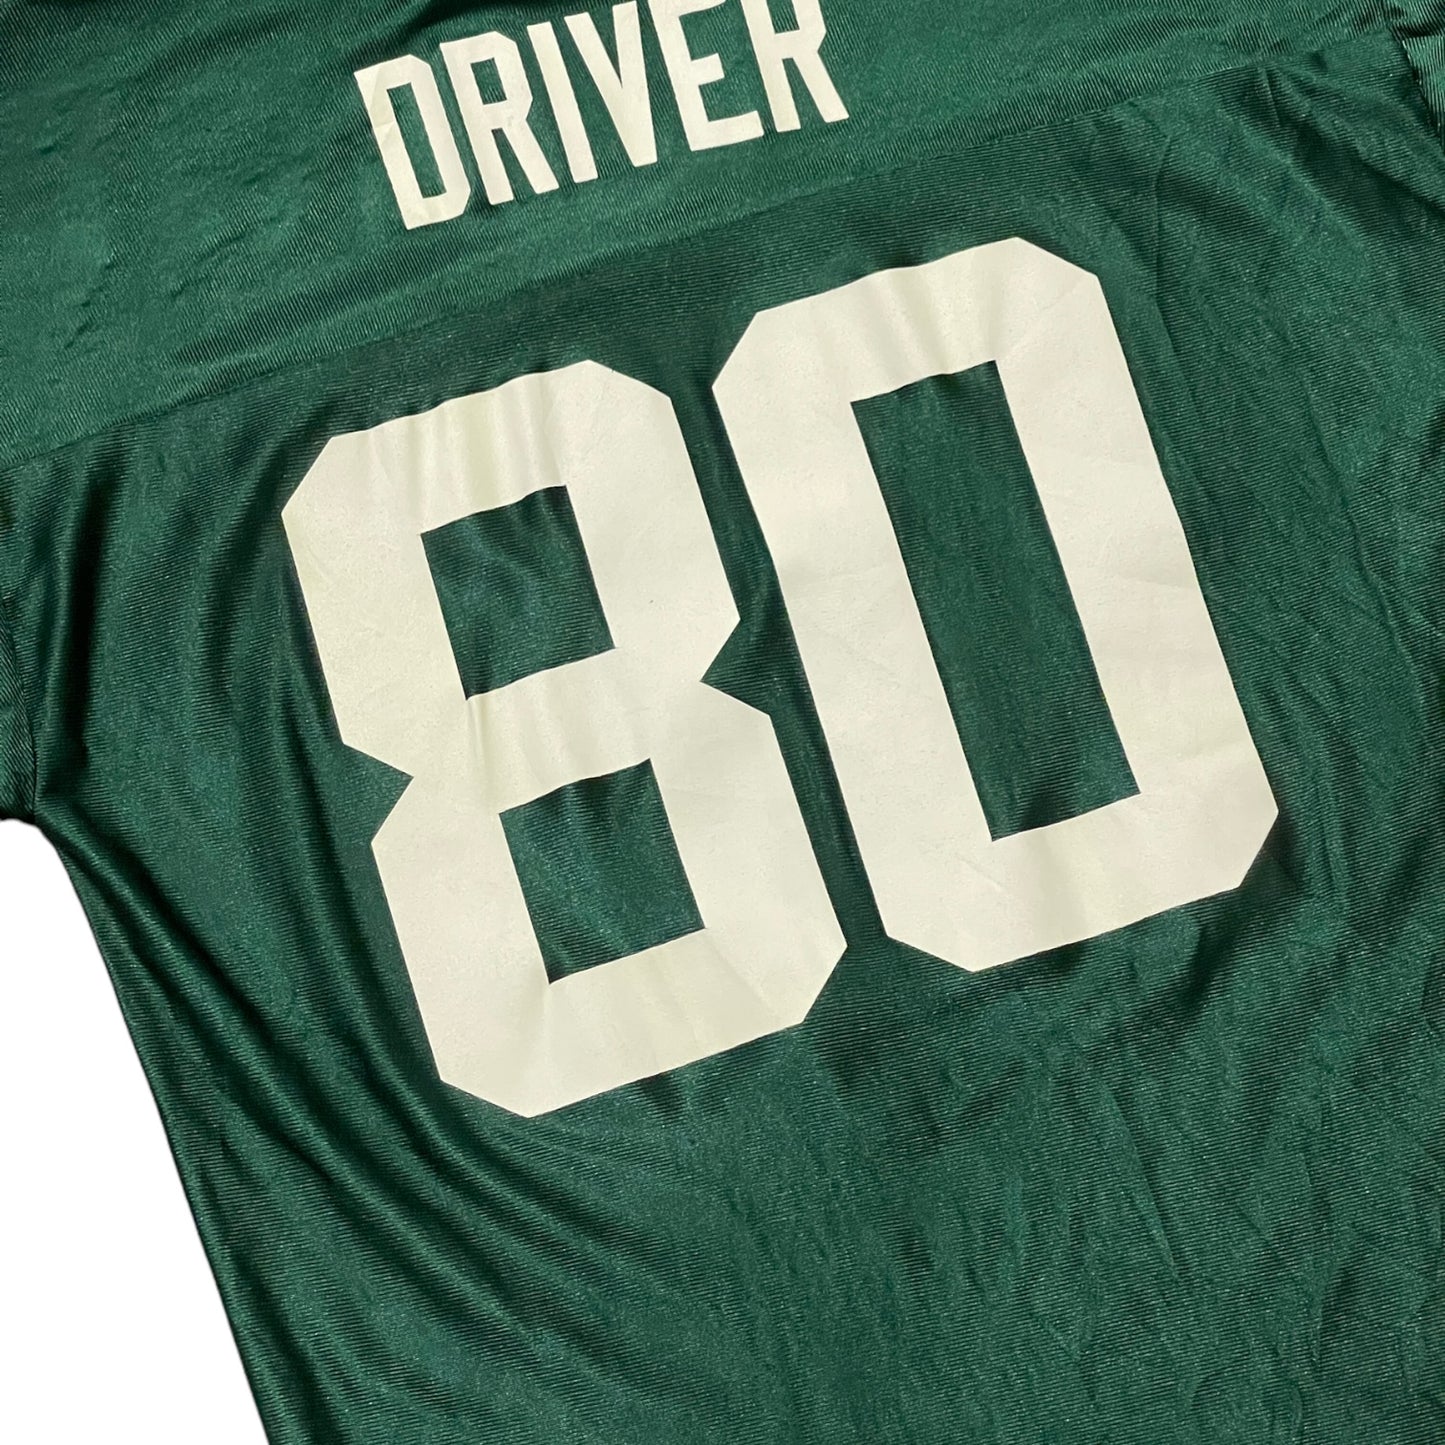 Green Bay Packers "Driver" 80 Jersey